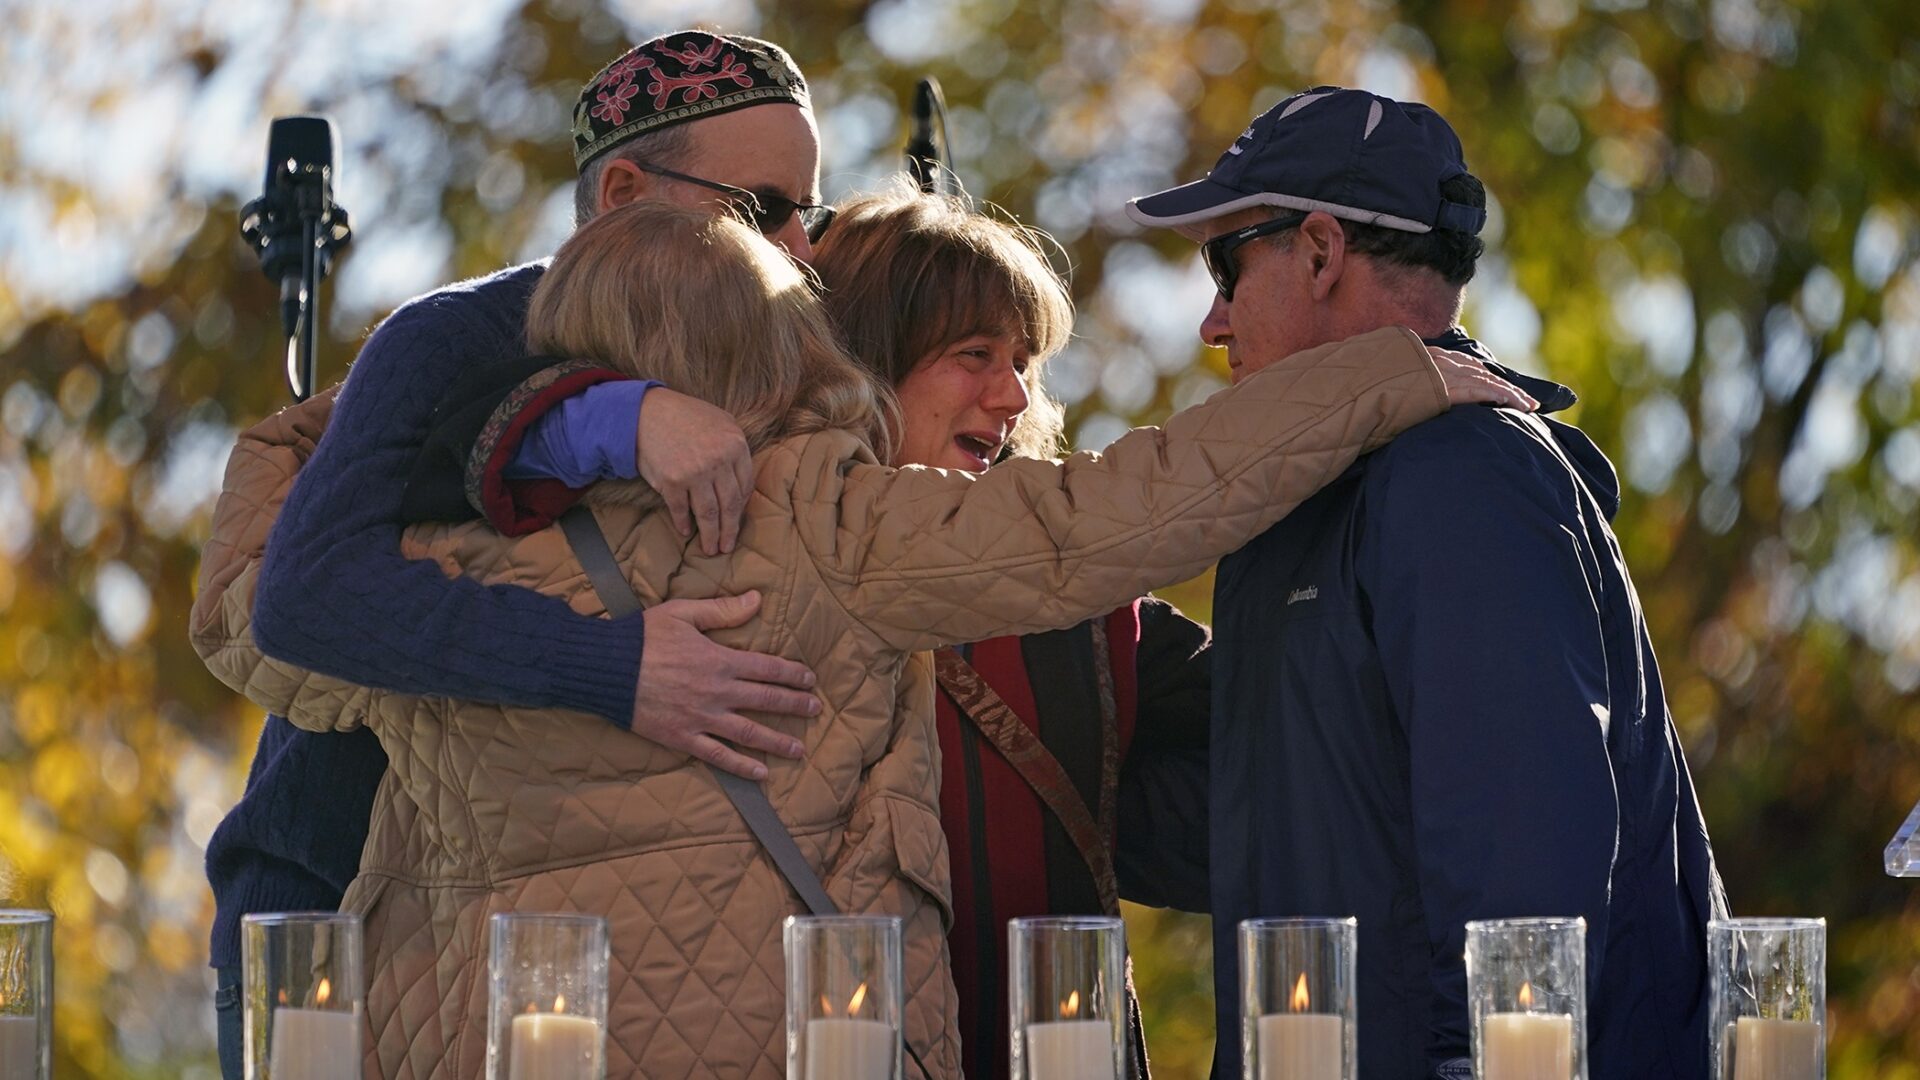 People hug after lighting a candle in memory of Melvin Wax, one of 11 worshippers killed four years ago when a gunman opened fire at the Tree of Life synagogue in the Squirrel Hill neighborhood, during a commemoration ceremony in Pittsburgh on Thursday, Oct. 27, 2022. 